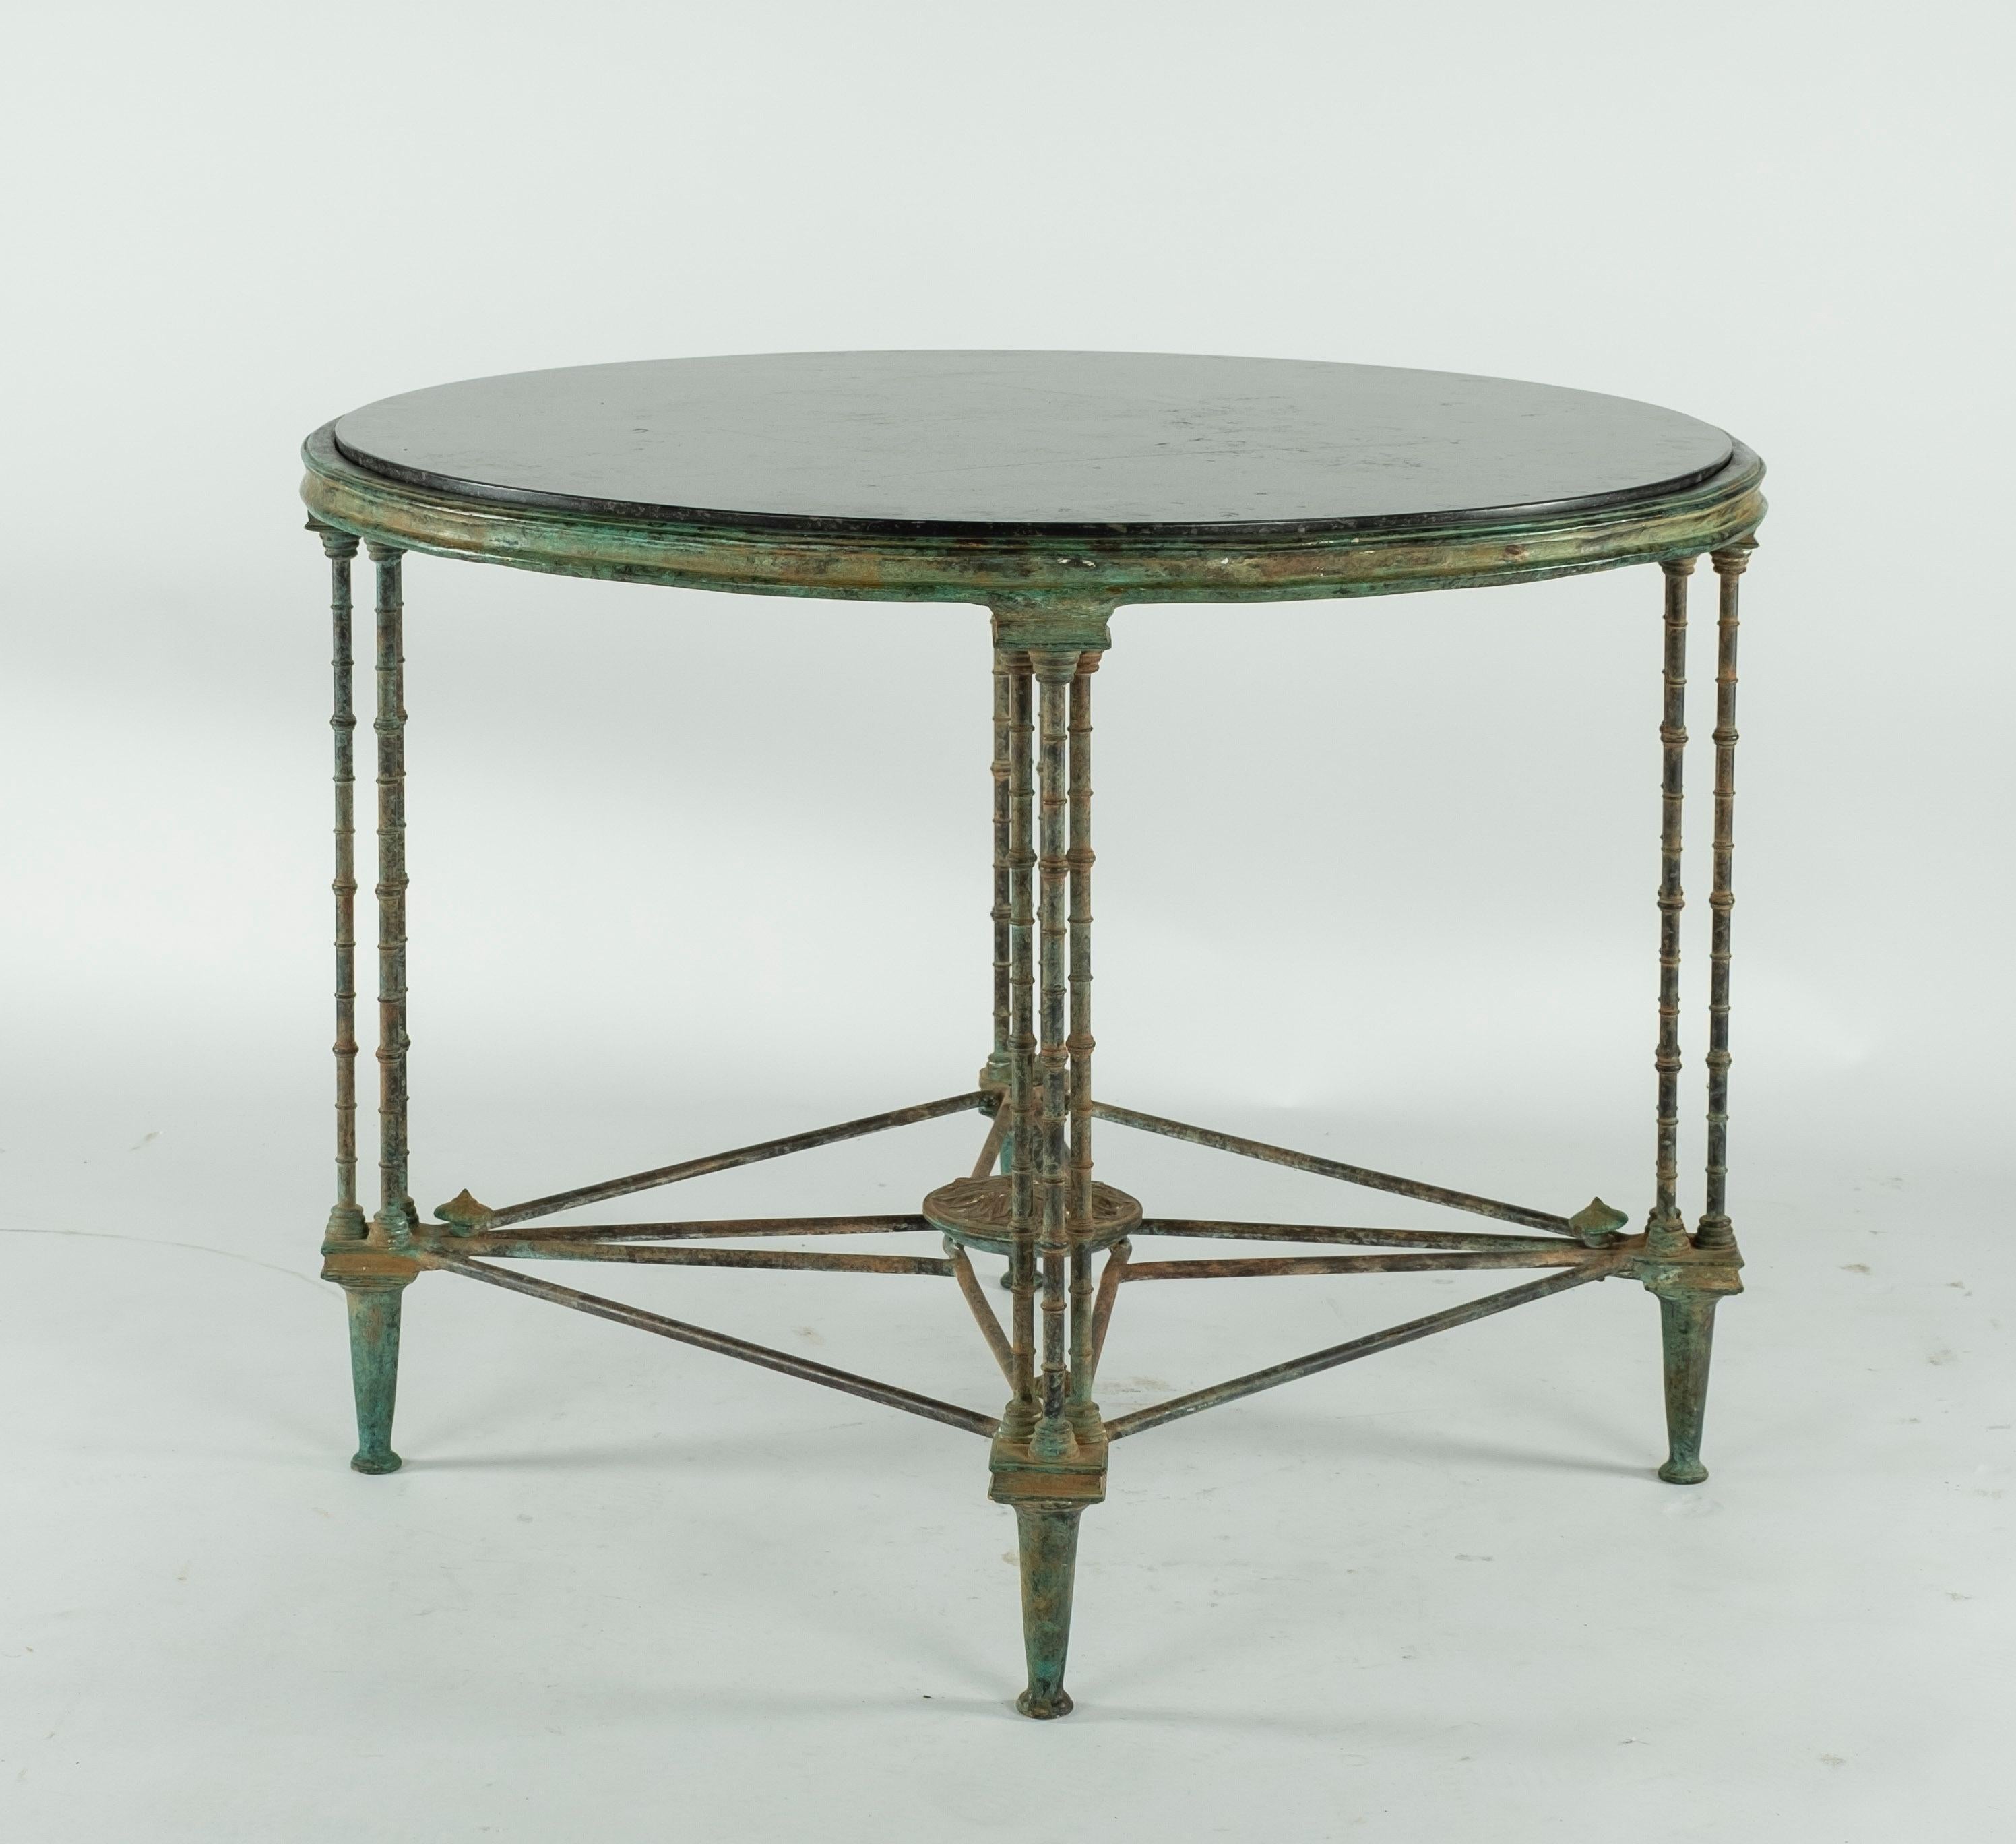 Intricate cast bronze table base with four legs and a black stone marble top. Beautiful patina on the bronze. Pair of this table is available.